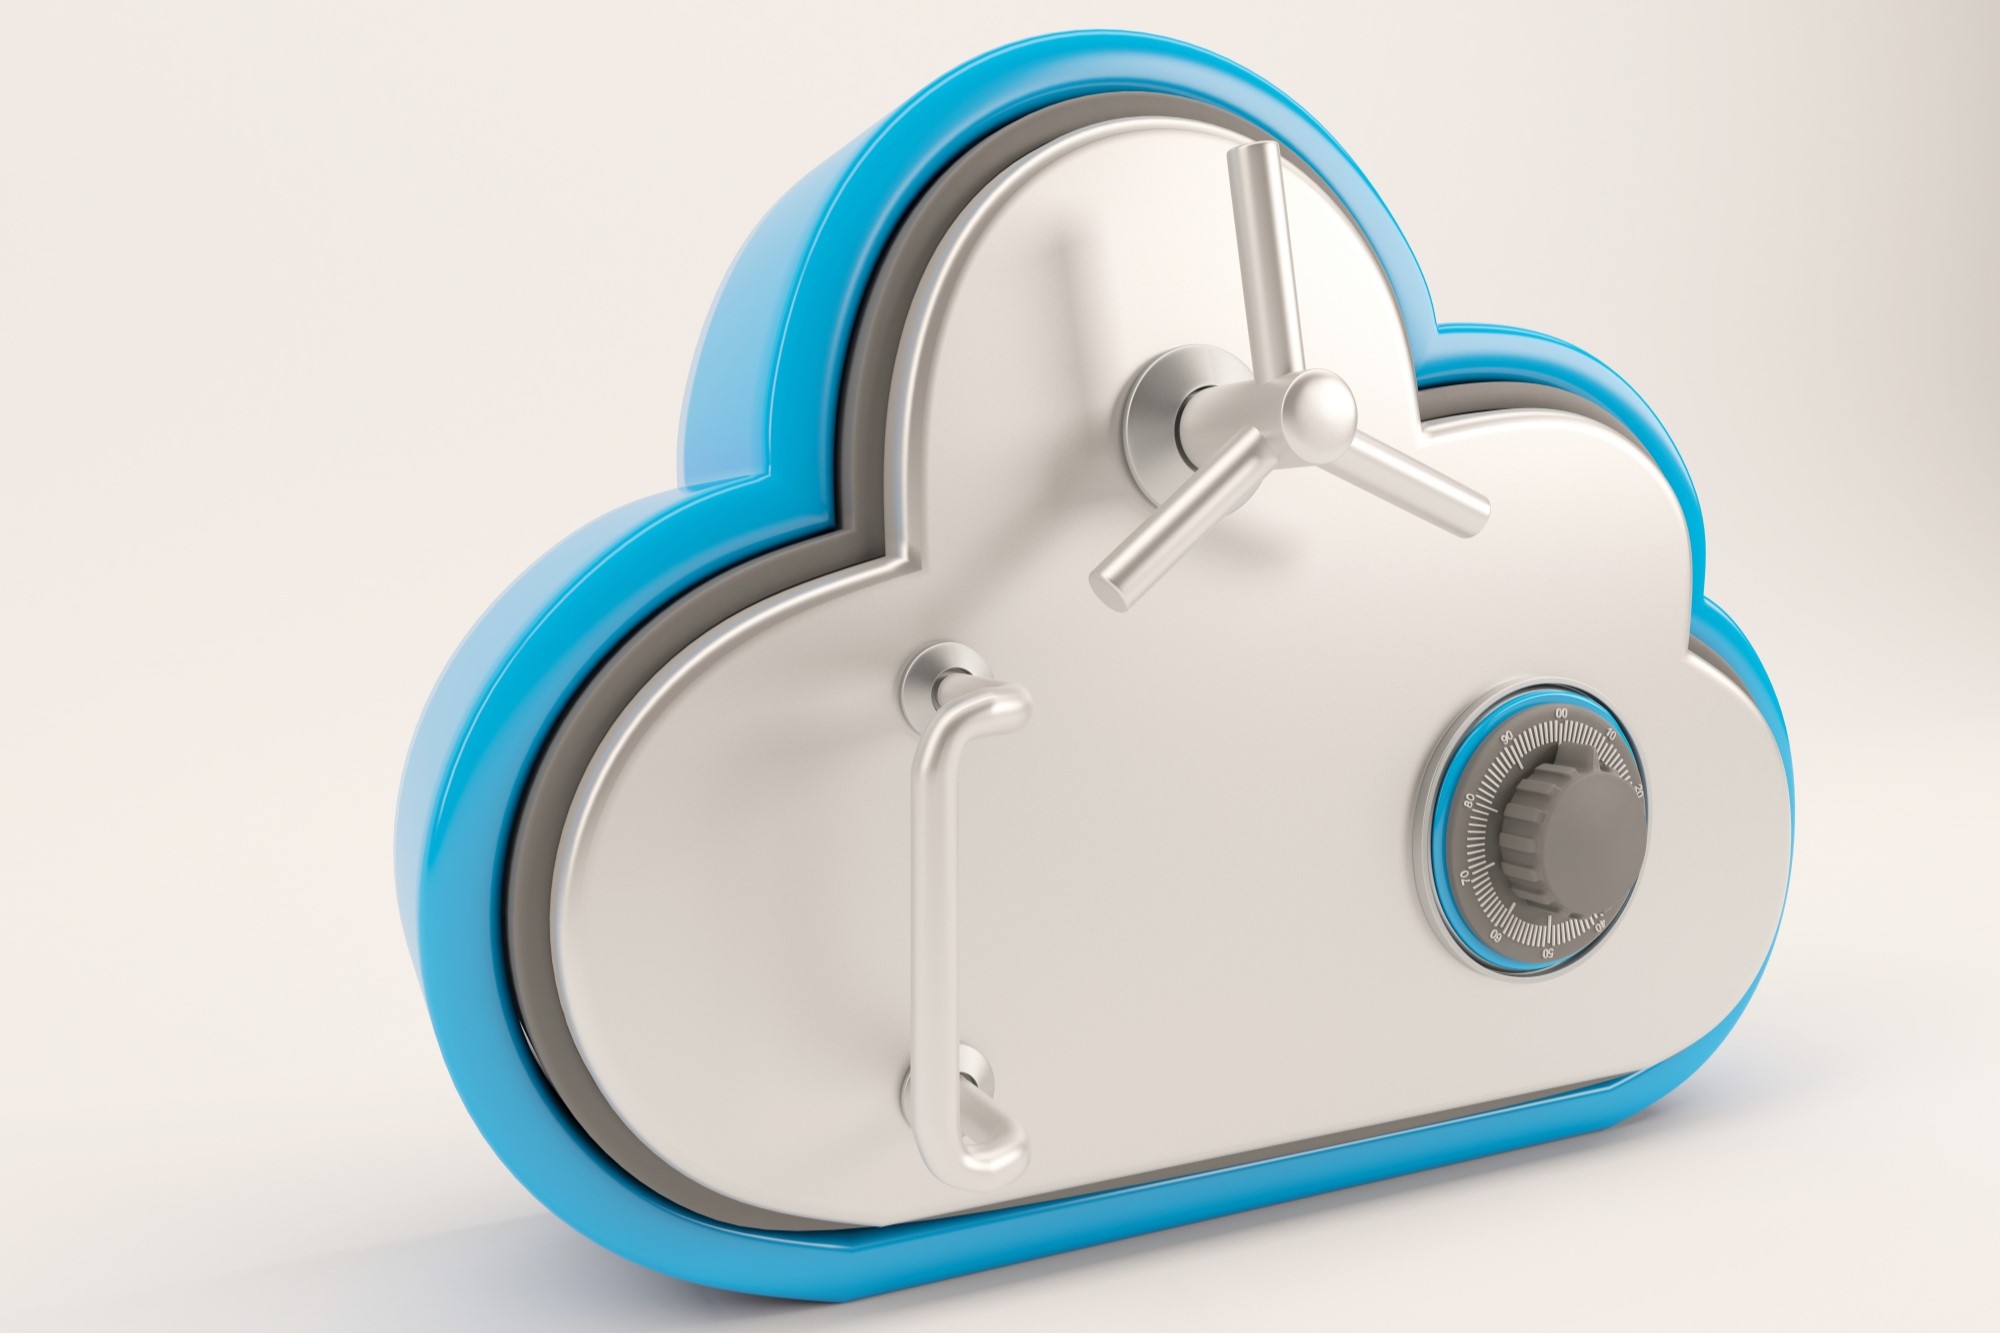 Cloud Storage Security: Securing Data in the Cloud